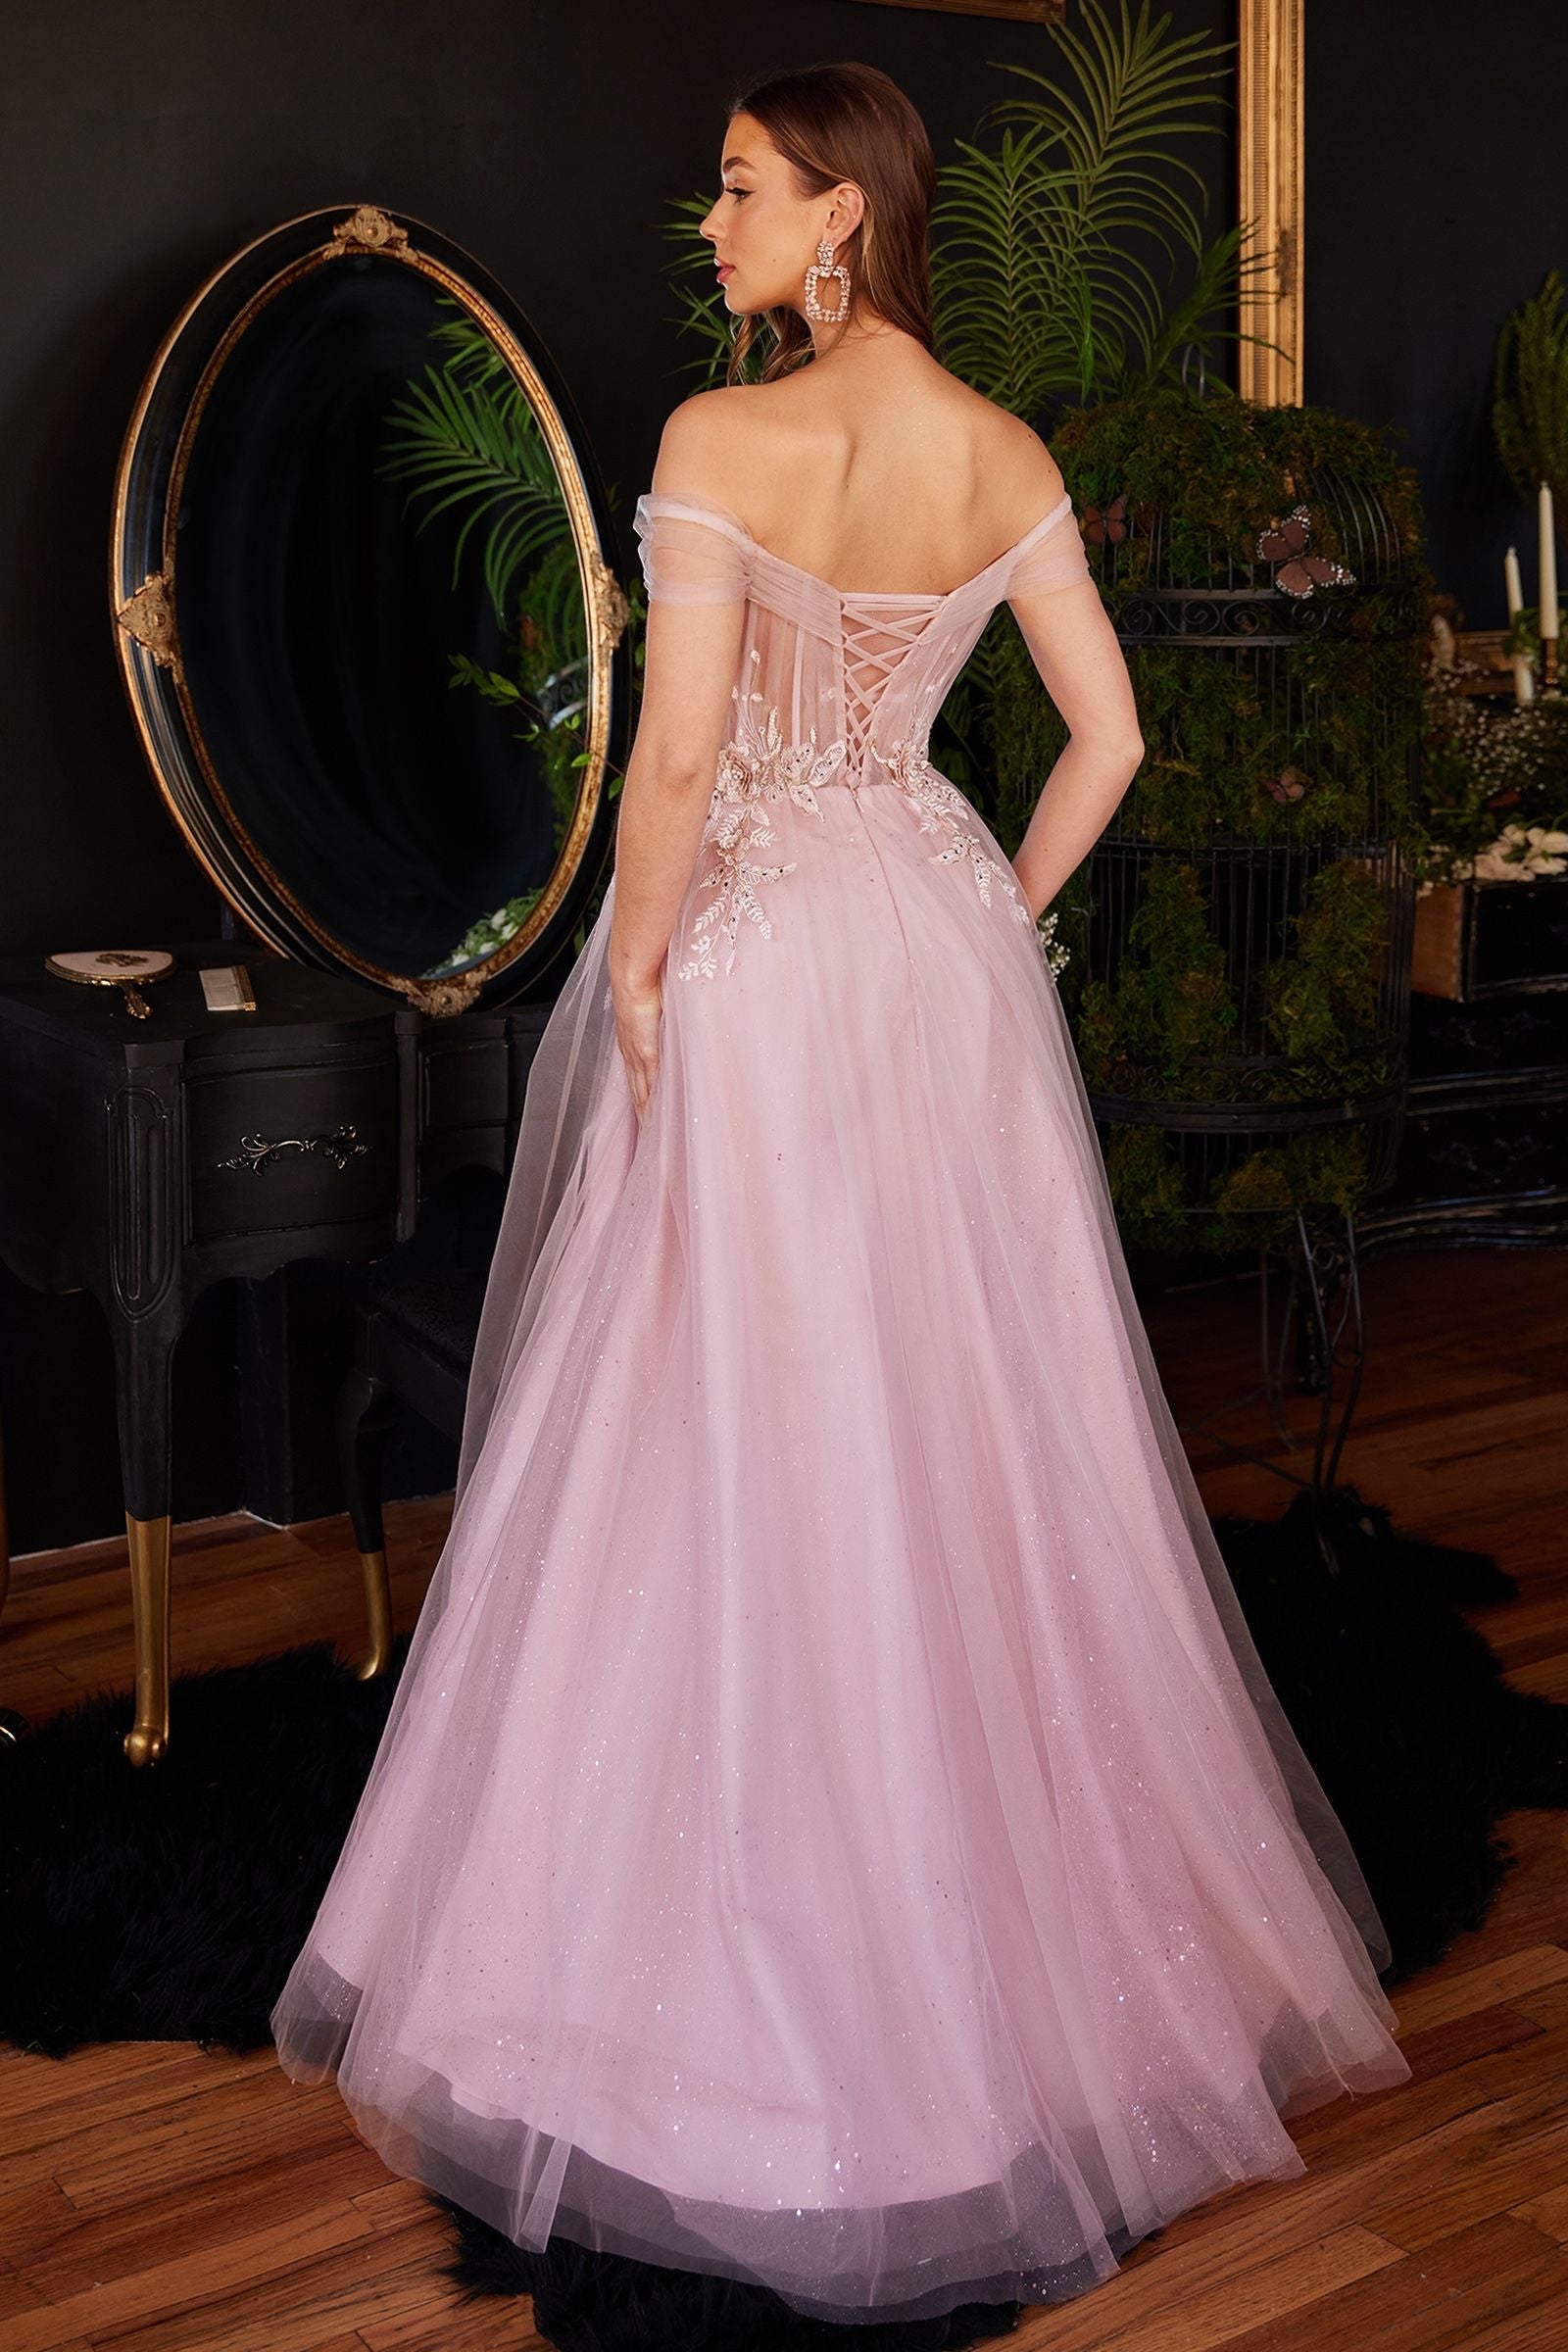 princess style pink wedding ball gown with a corset bodice and intricate lace appliques 